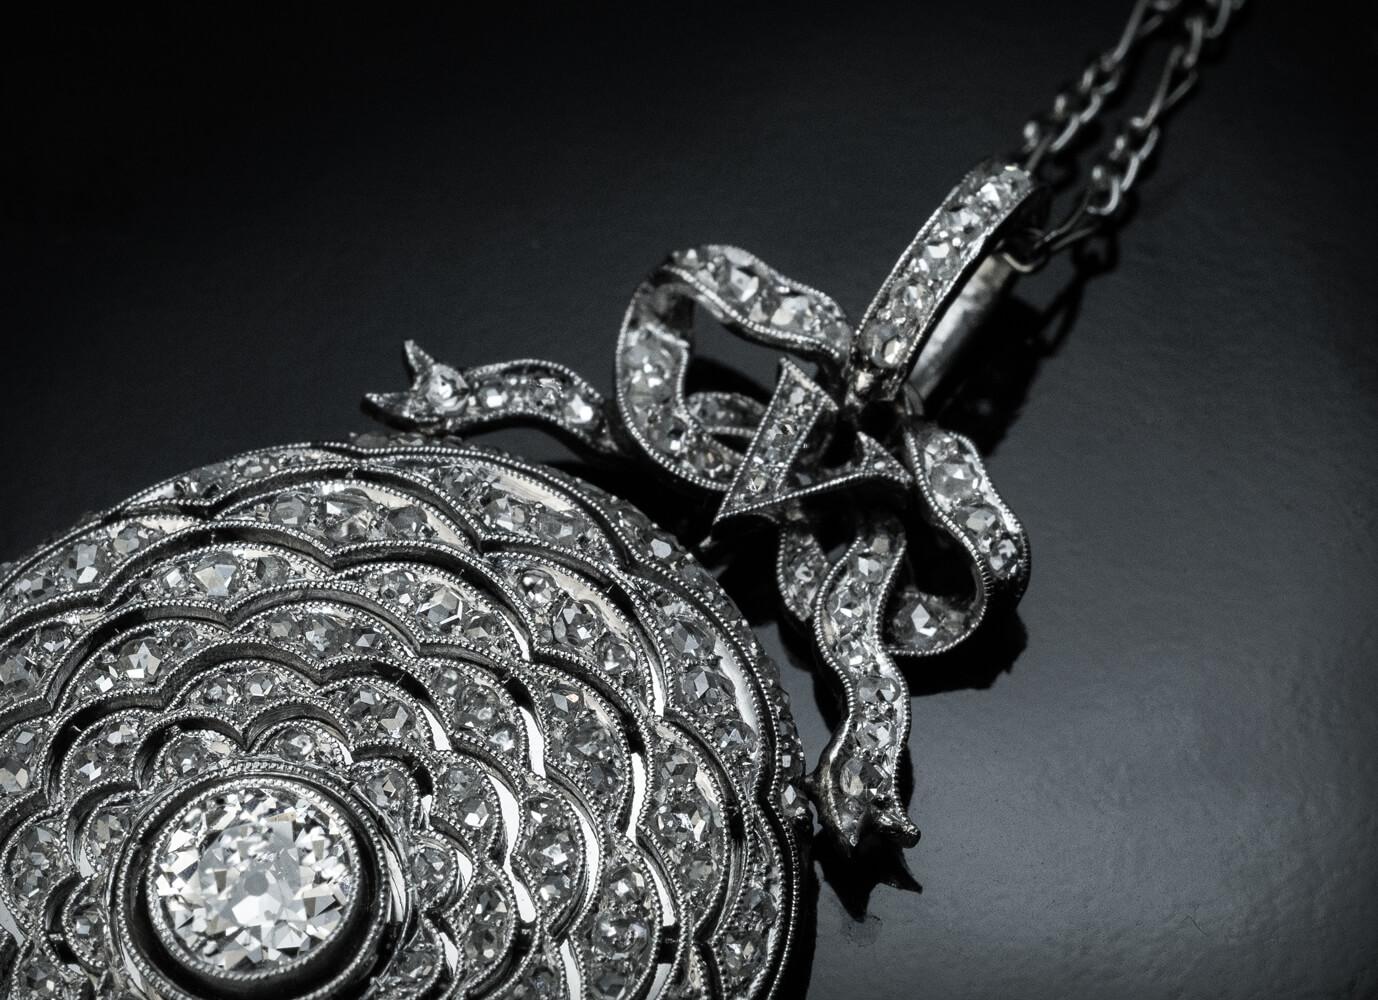 Circa 1910
This superbly crafted fifth anniversary necklace is made entirely in platinum. The front of the pendant is designed as stylized floral petals arranged in concentric circles. The “petals” are set with old rose cut diamonds and applied over